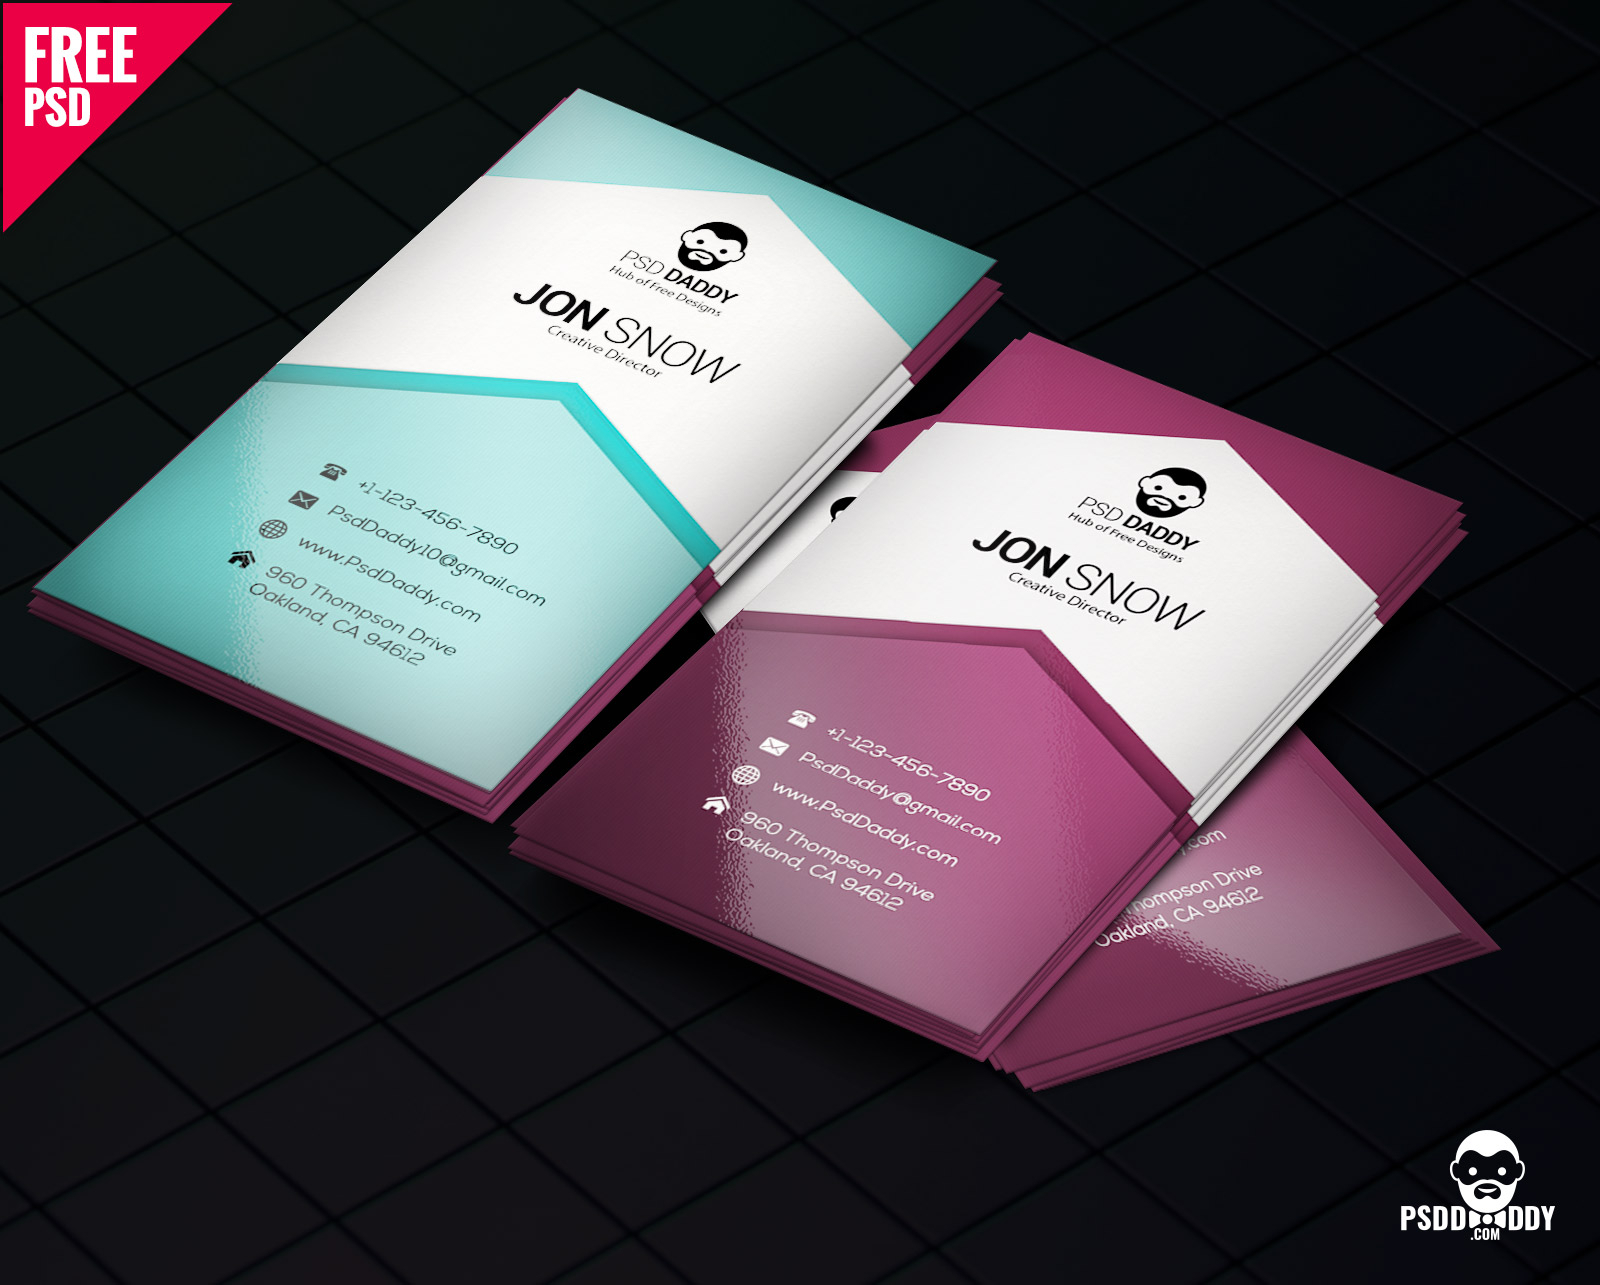 Download]Creative Business Card Psd Free | Psddaddy Pertaining To Name Card Template Photoshop